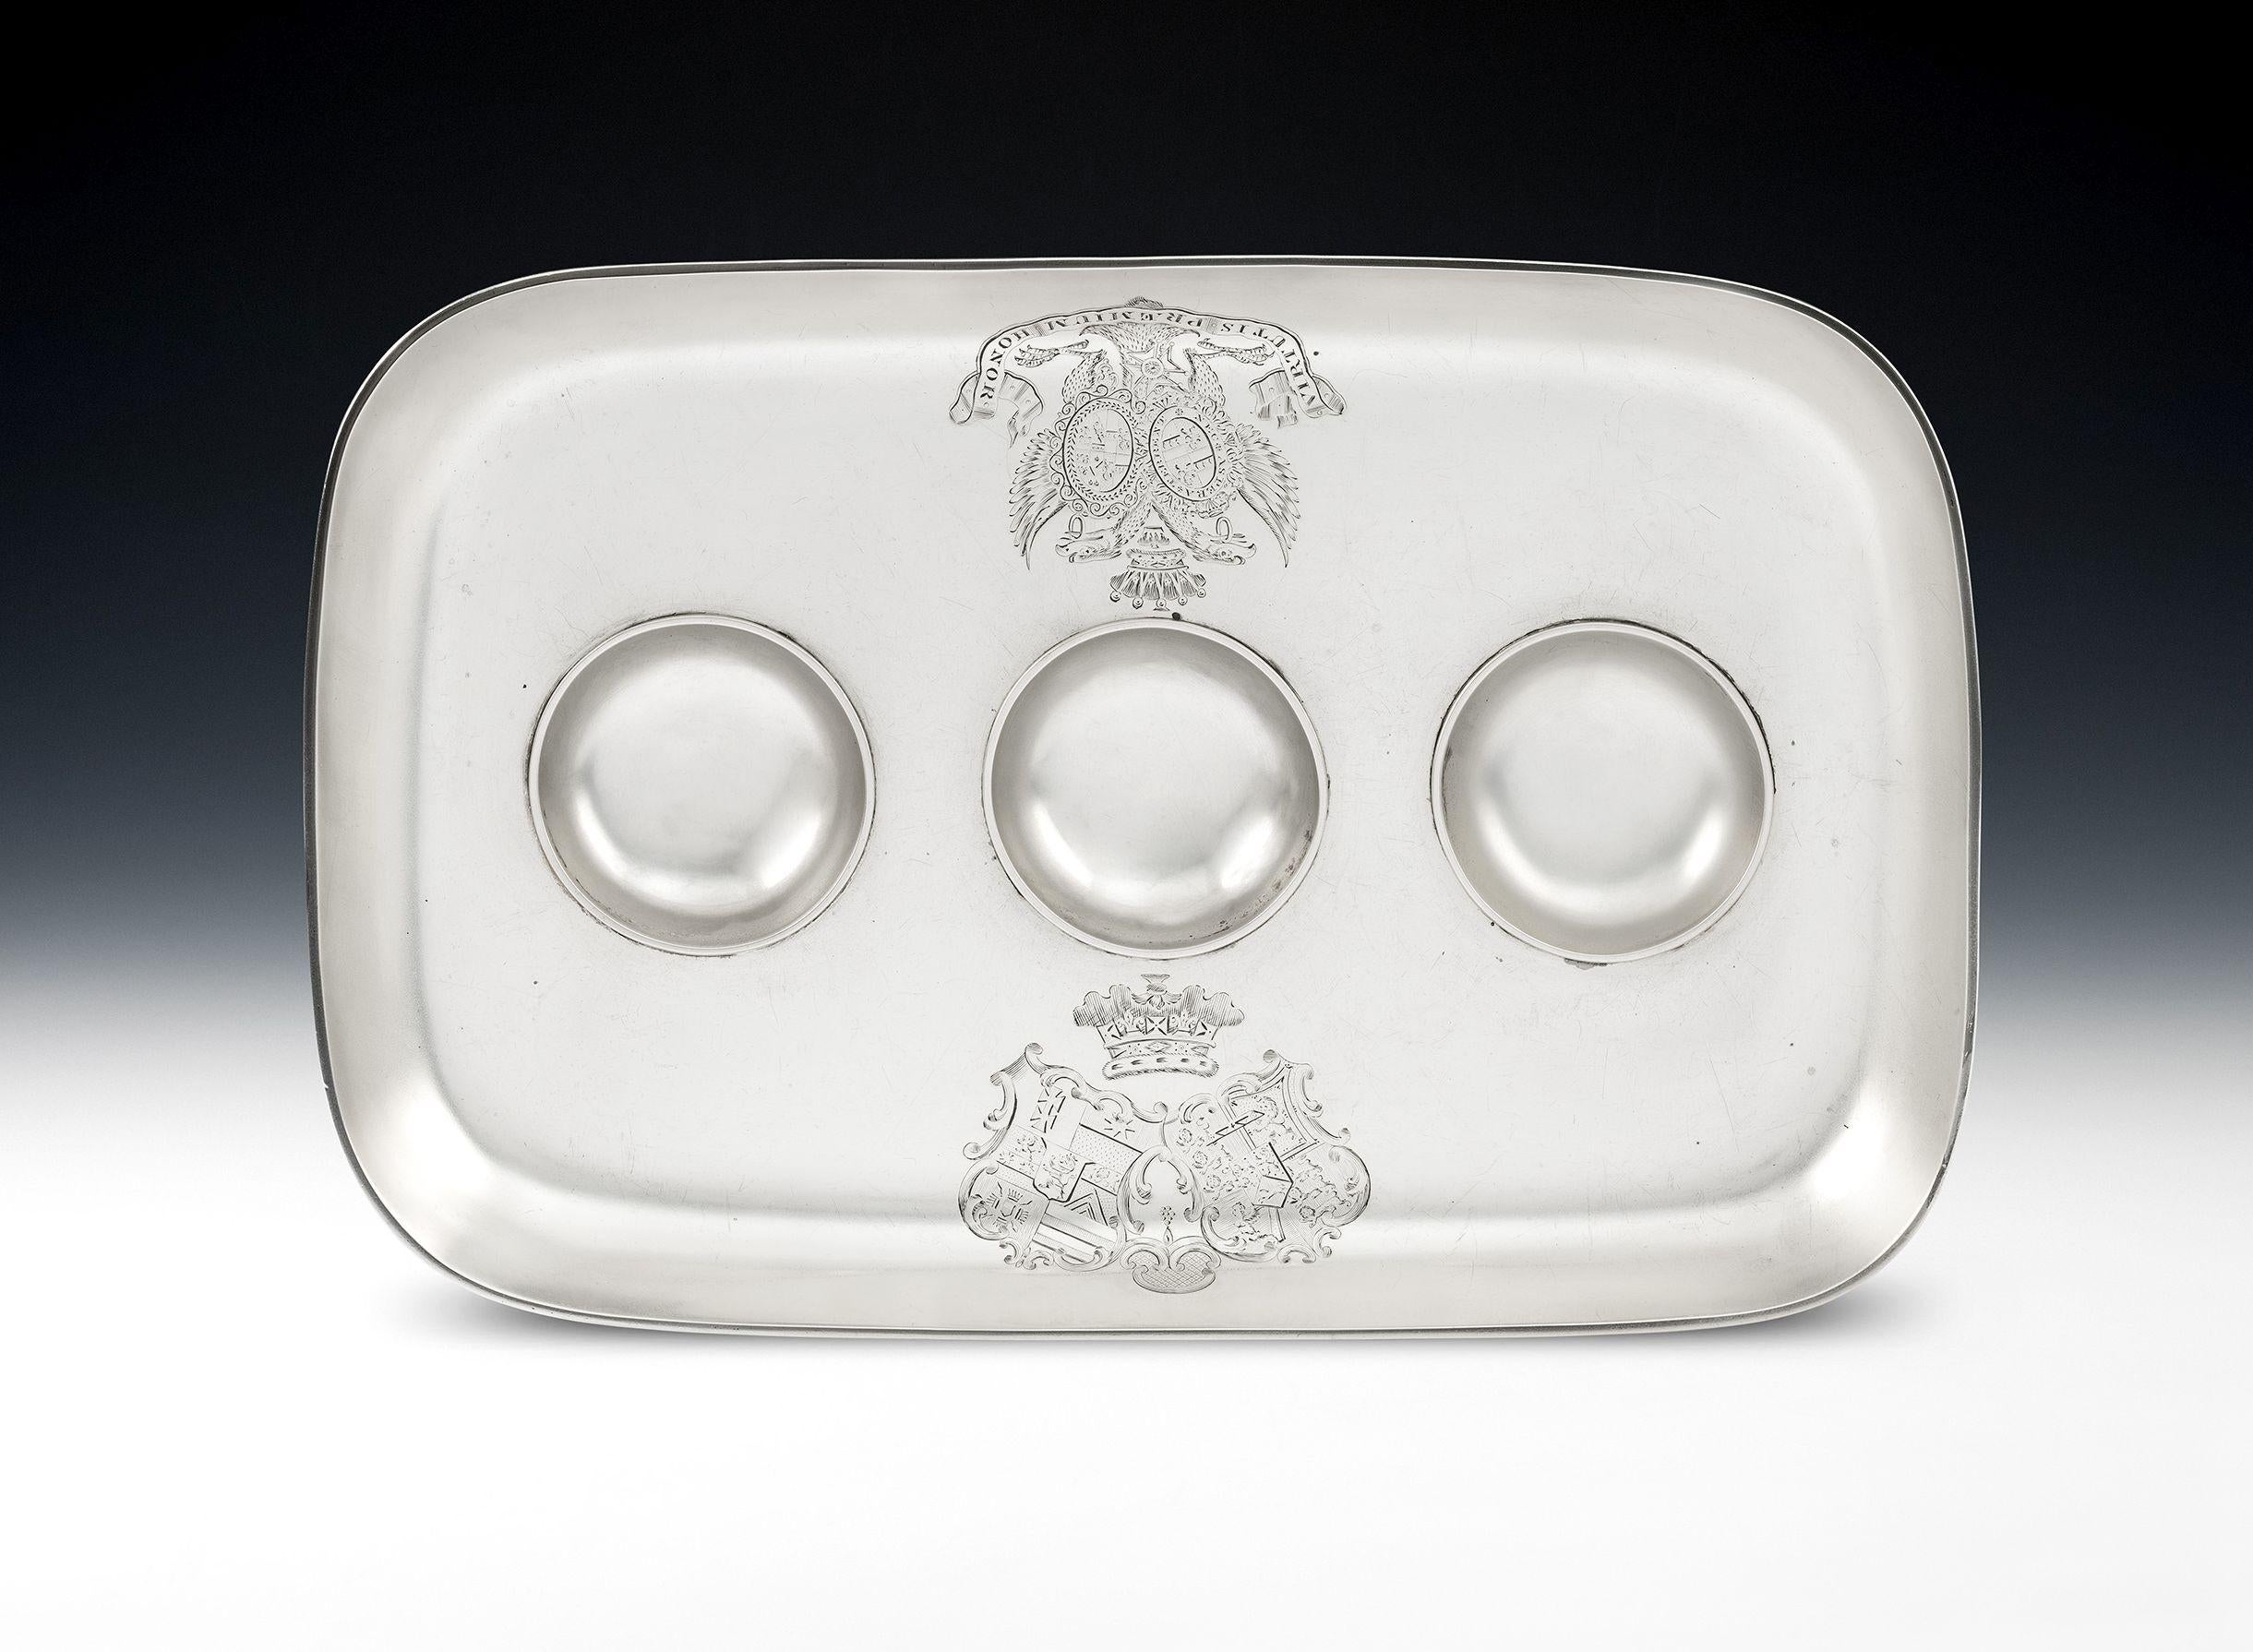 This highly important and exceptional Royal Inkstand was made in London in 1835 by the very fine silversmith Charles Fox II. The Inkstand is of a large size and broad rectangular in form, with up curved sides and rounded corners. This piece stands